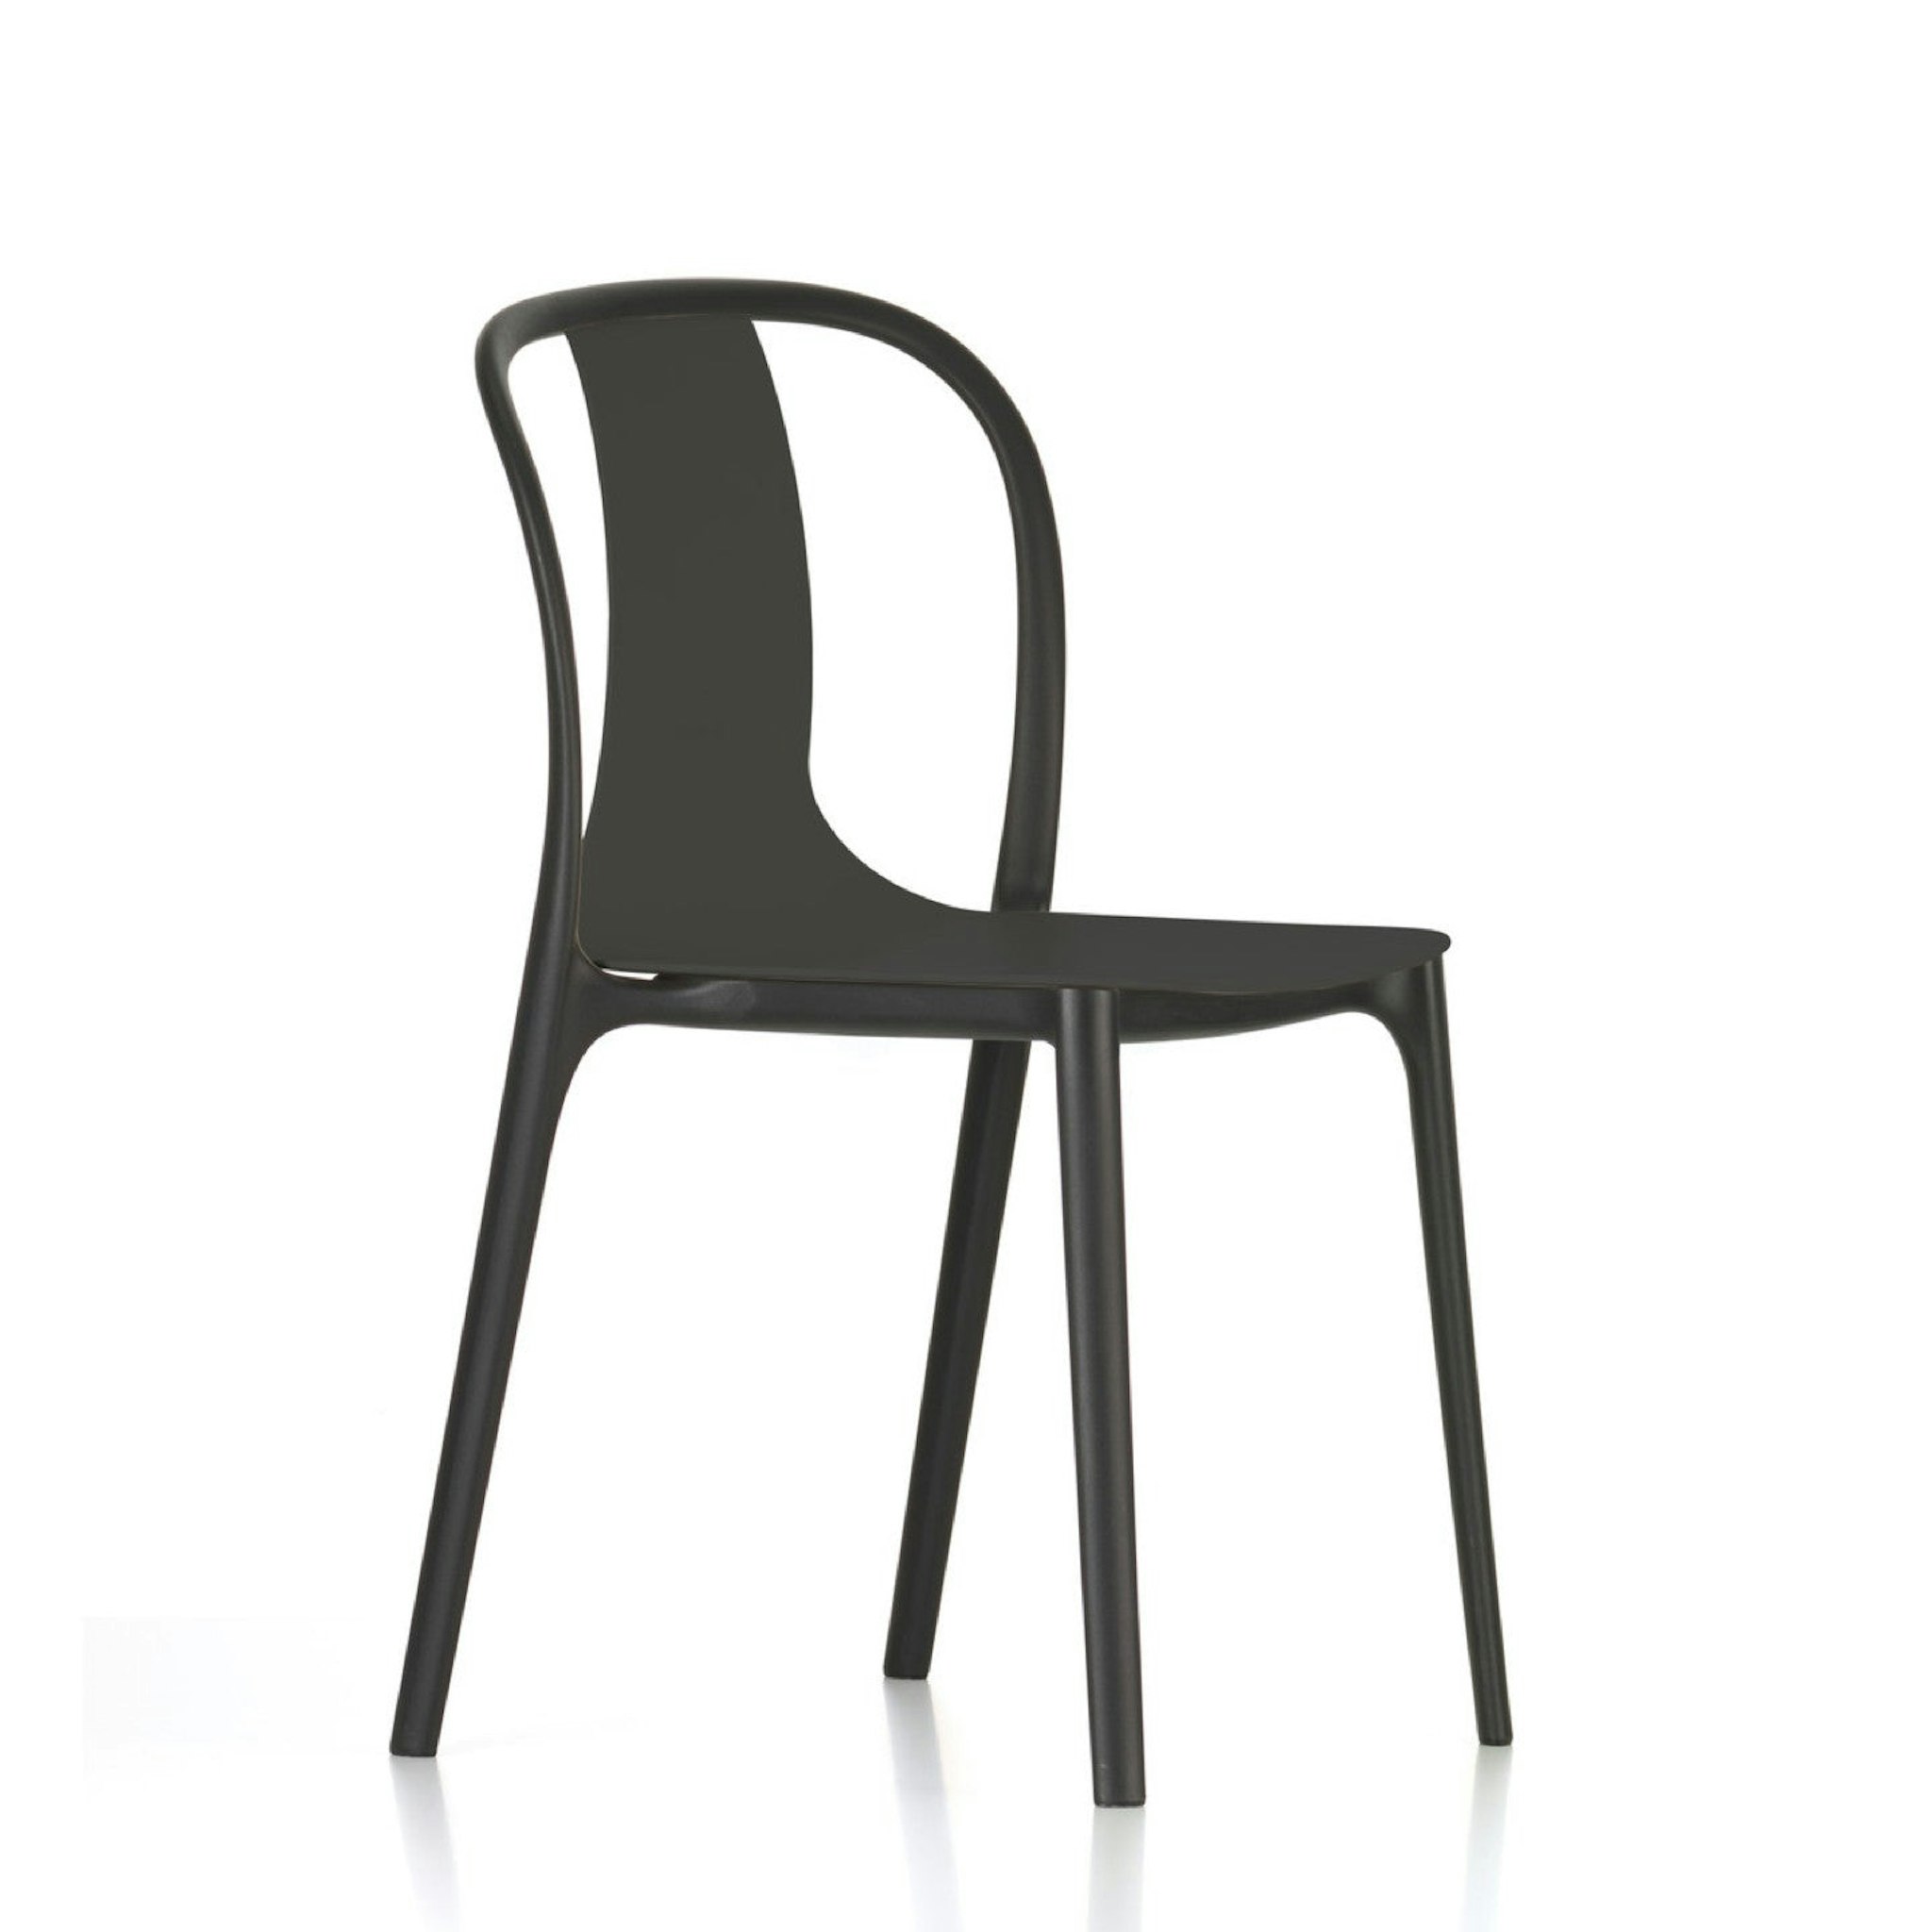 Belleville Chair Plastic by Vitra